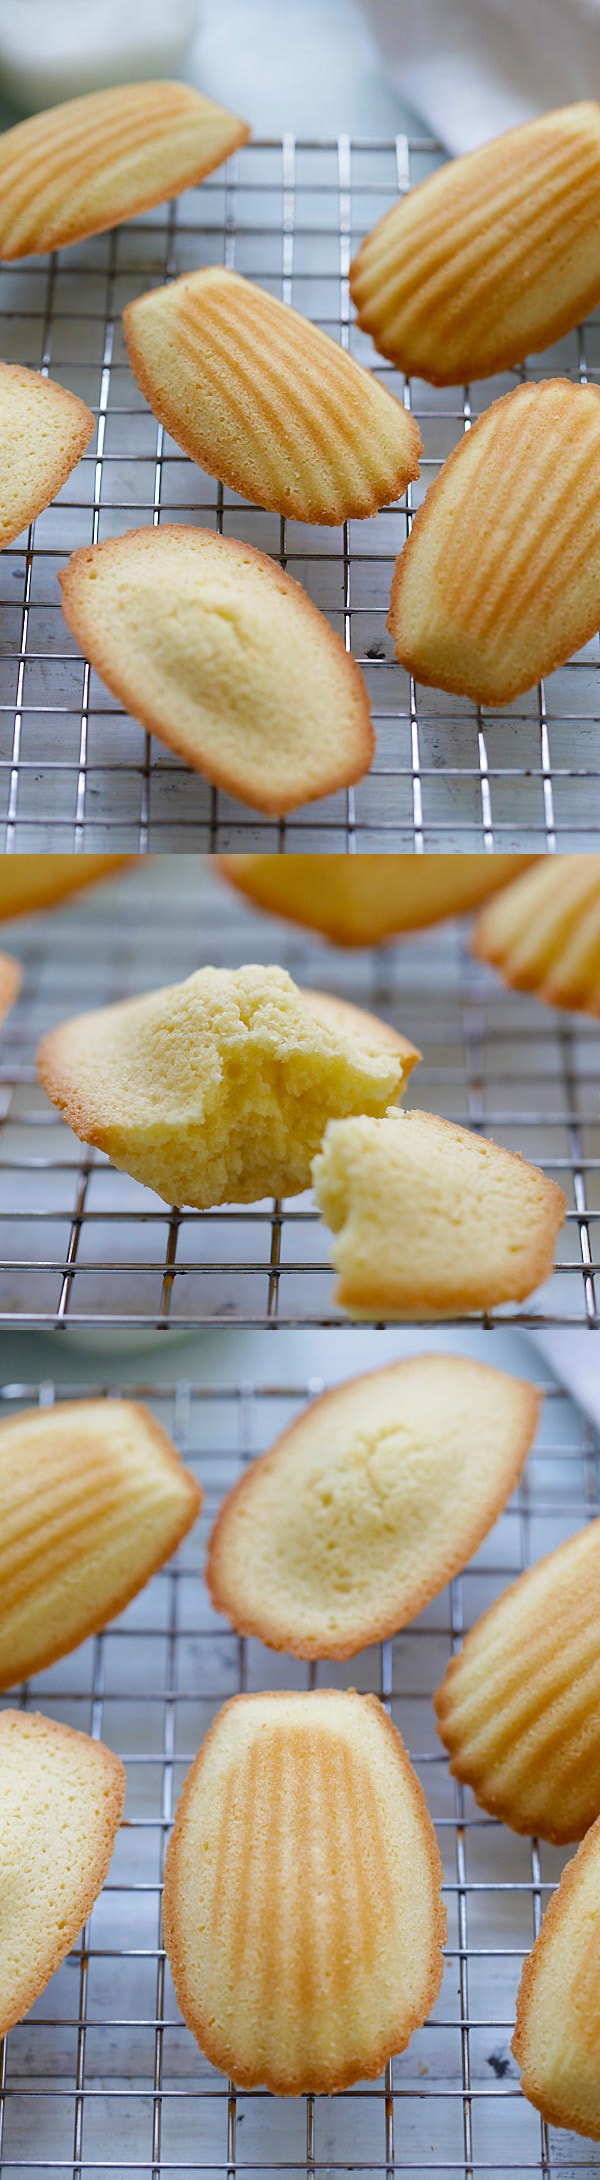 Madeleine is a small butter cake in beautiful shell shape. It's made of butter, eggs and flour. This easy madeleine recipe makes the best little dessert that you just can't stop eating | rasamalaysia.com